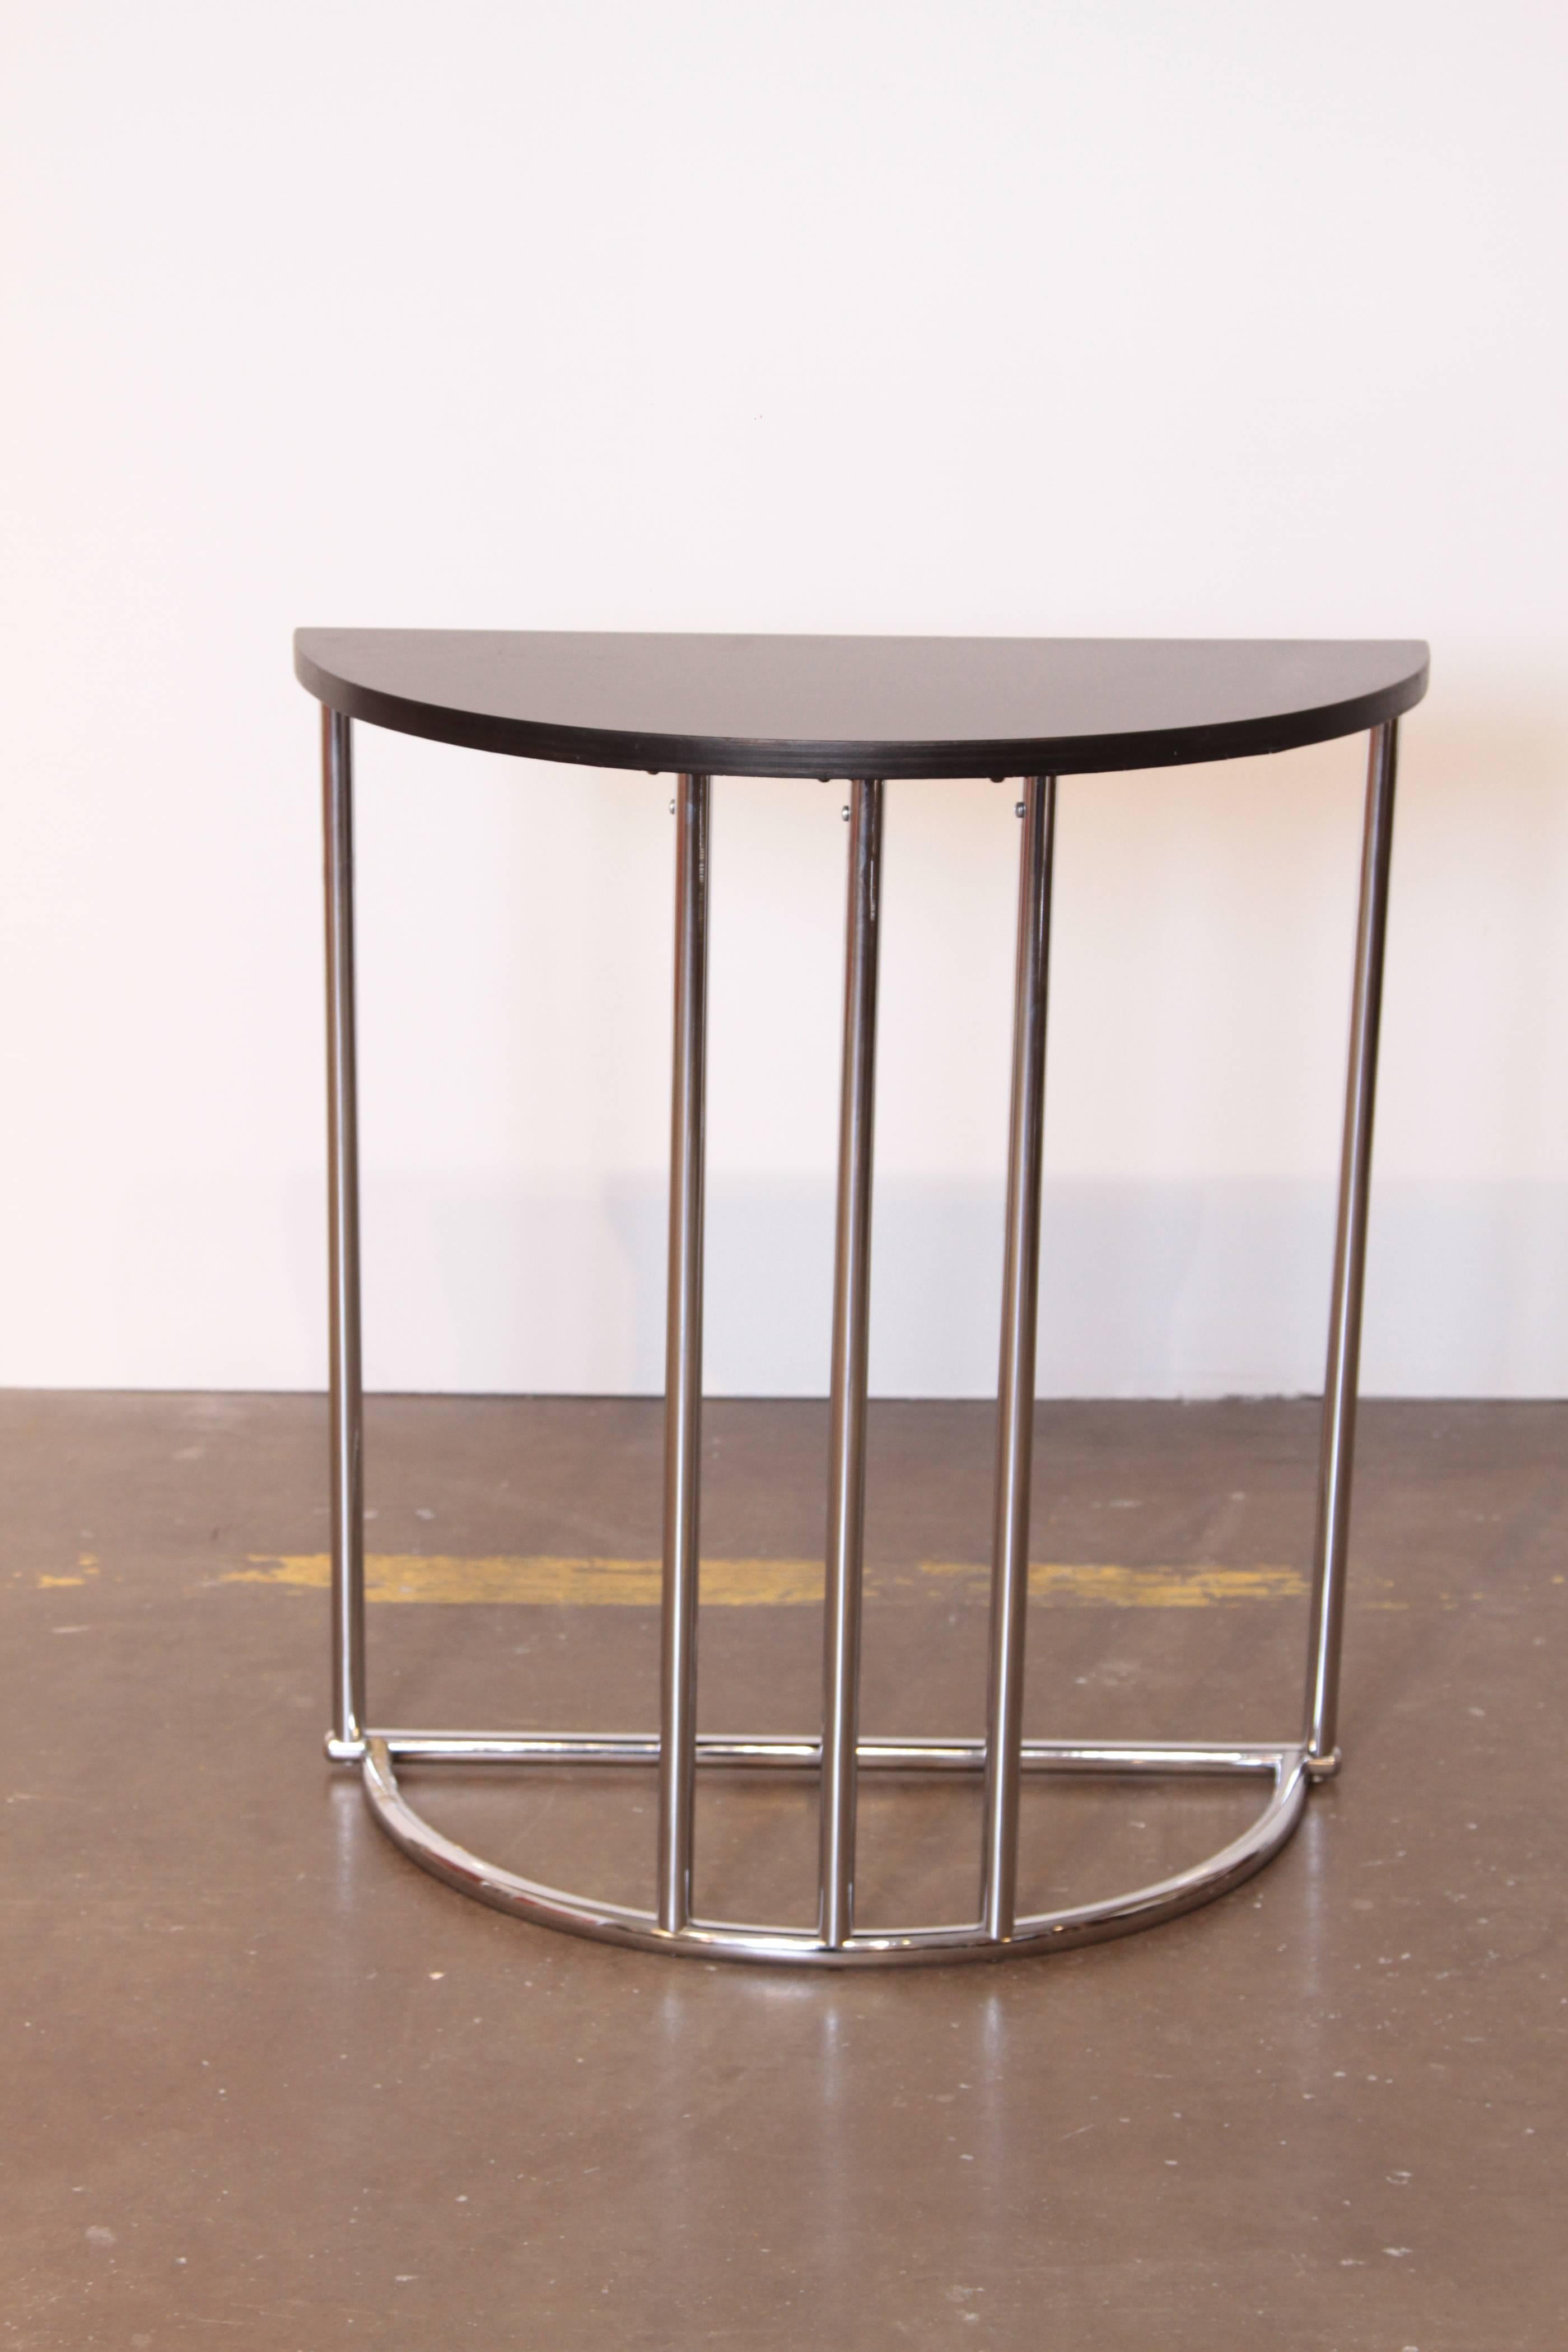 Machine Age Art Deco Demilune Console Table, Royalchrome Distinctive Furniture, Royal Metal

This one is built like a tank and in near pristine restored condition.
Royalchrome Distinctive Furniture, Royal Metal 1937 Catalog, Model No. 340 End Table.